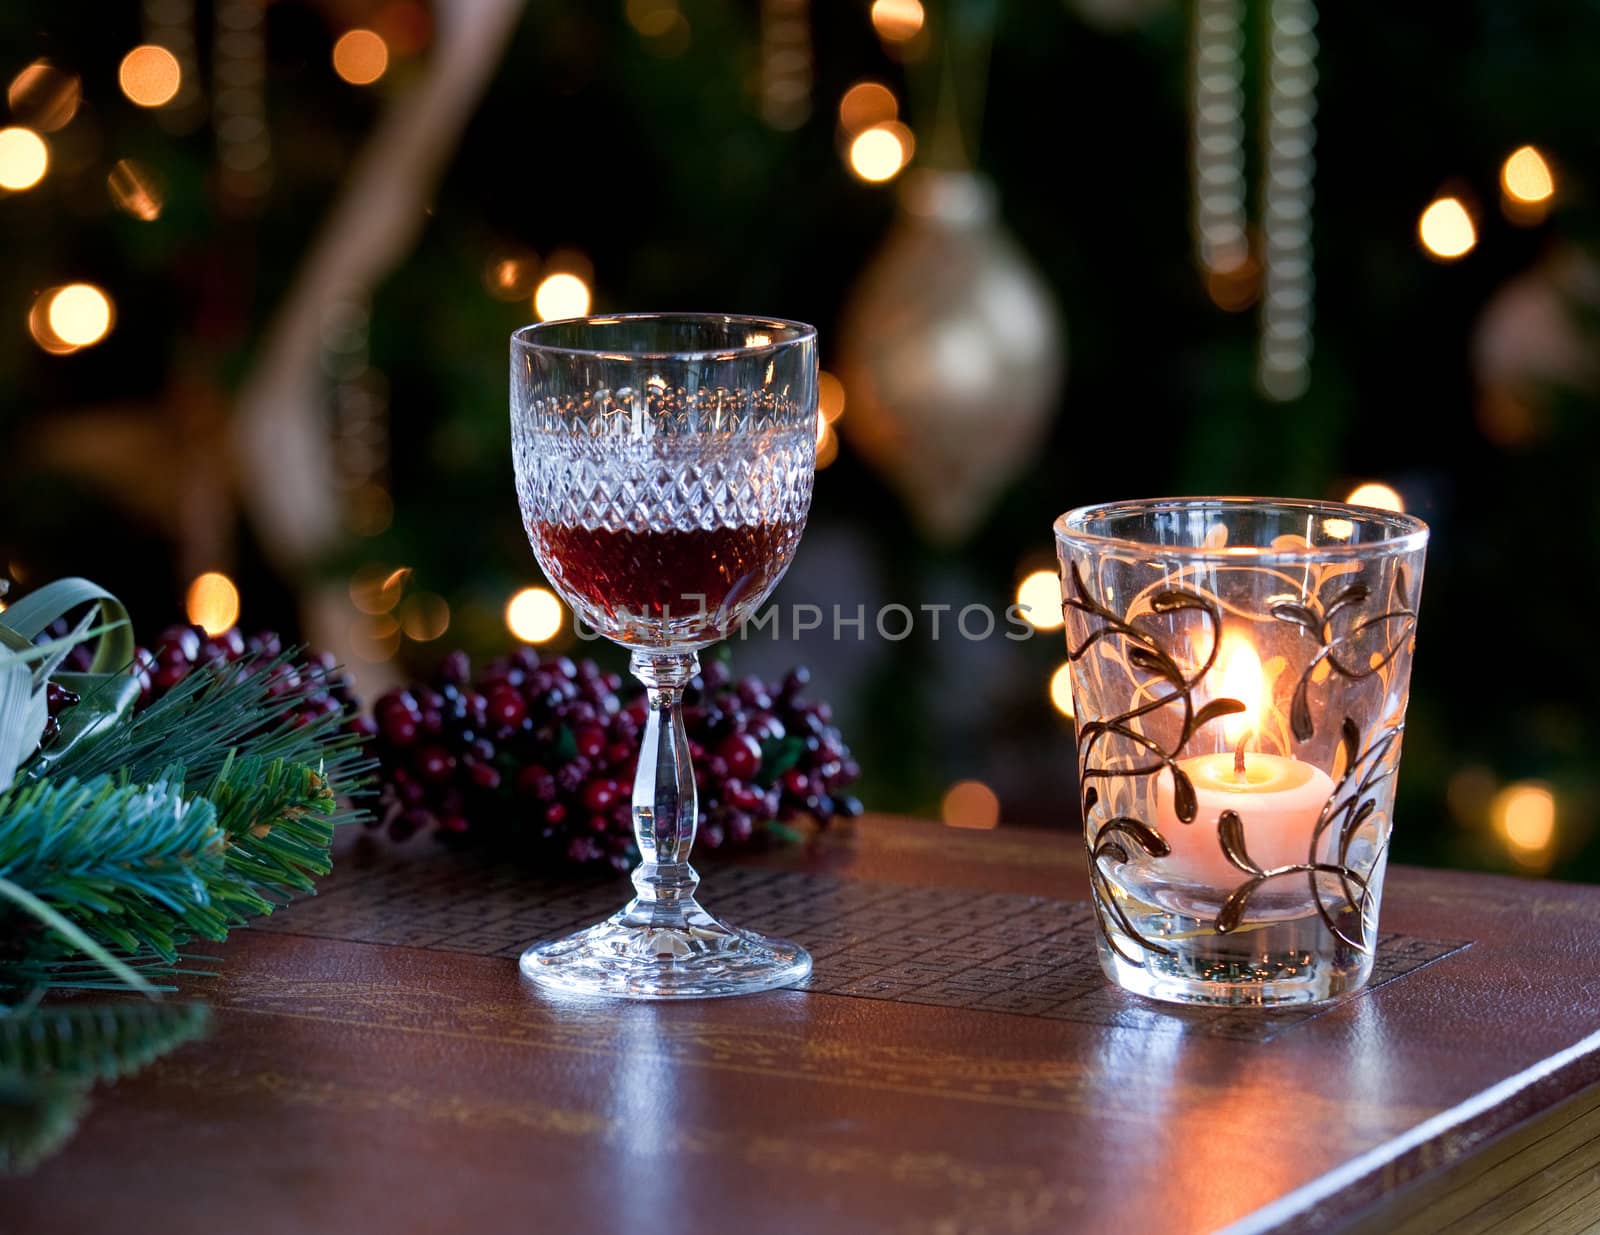 Cut glass sherry or port in front of xmas tree with cranberries and lit by candle